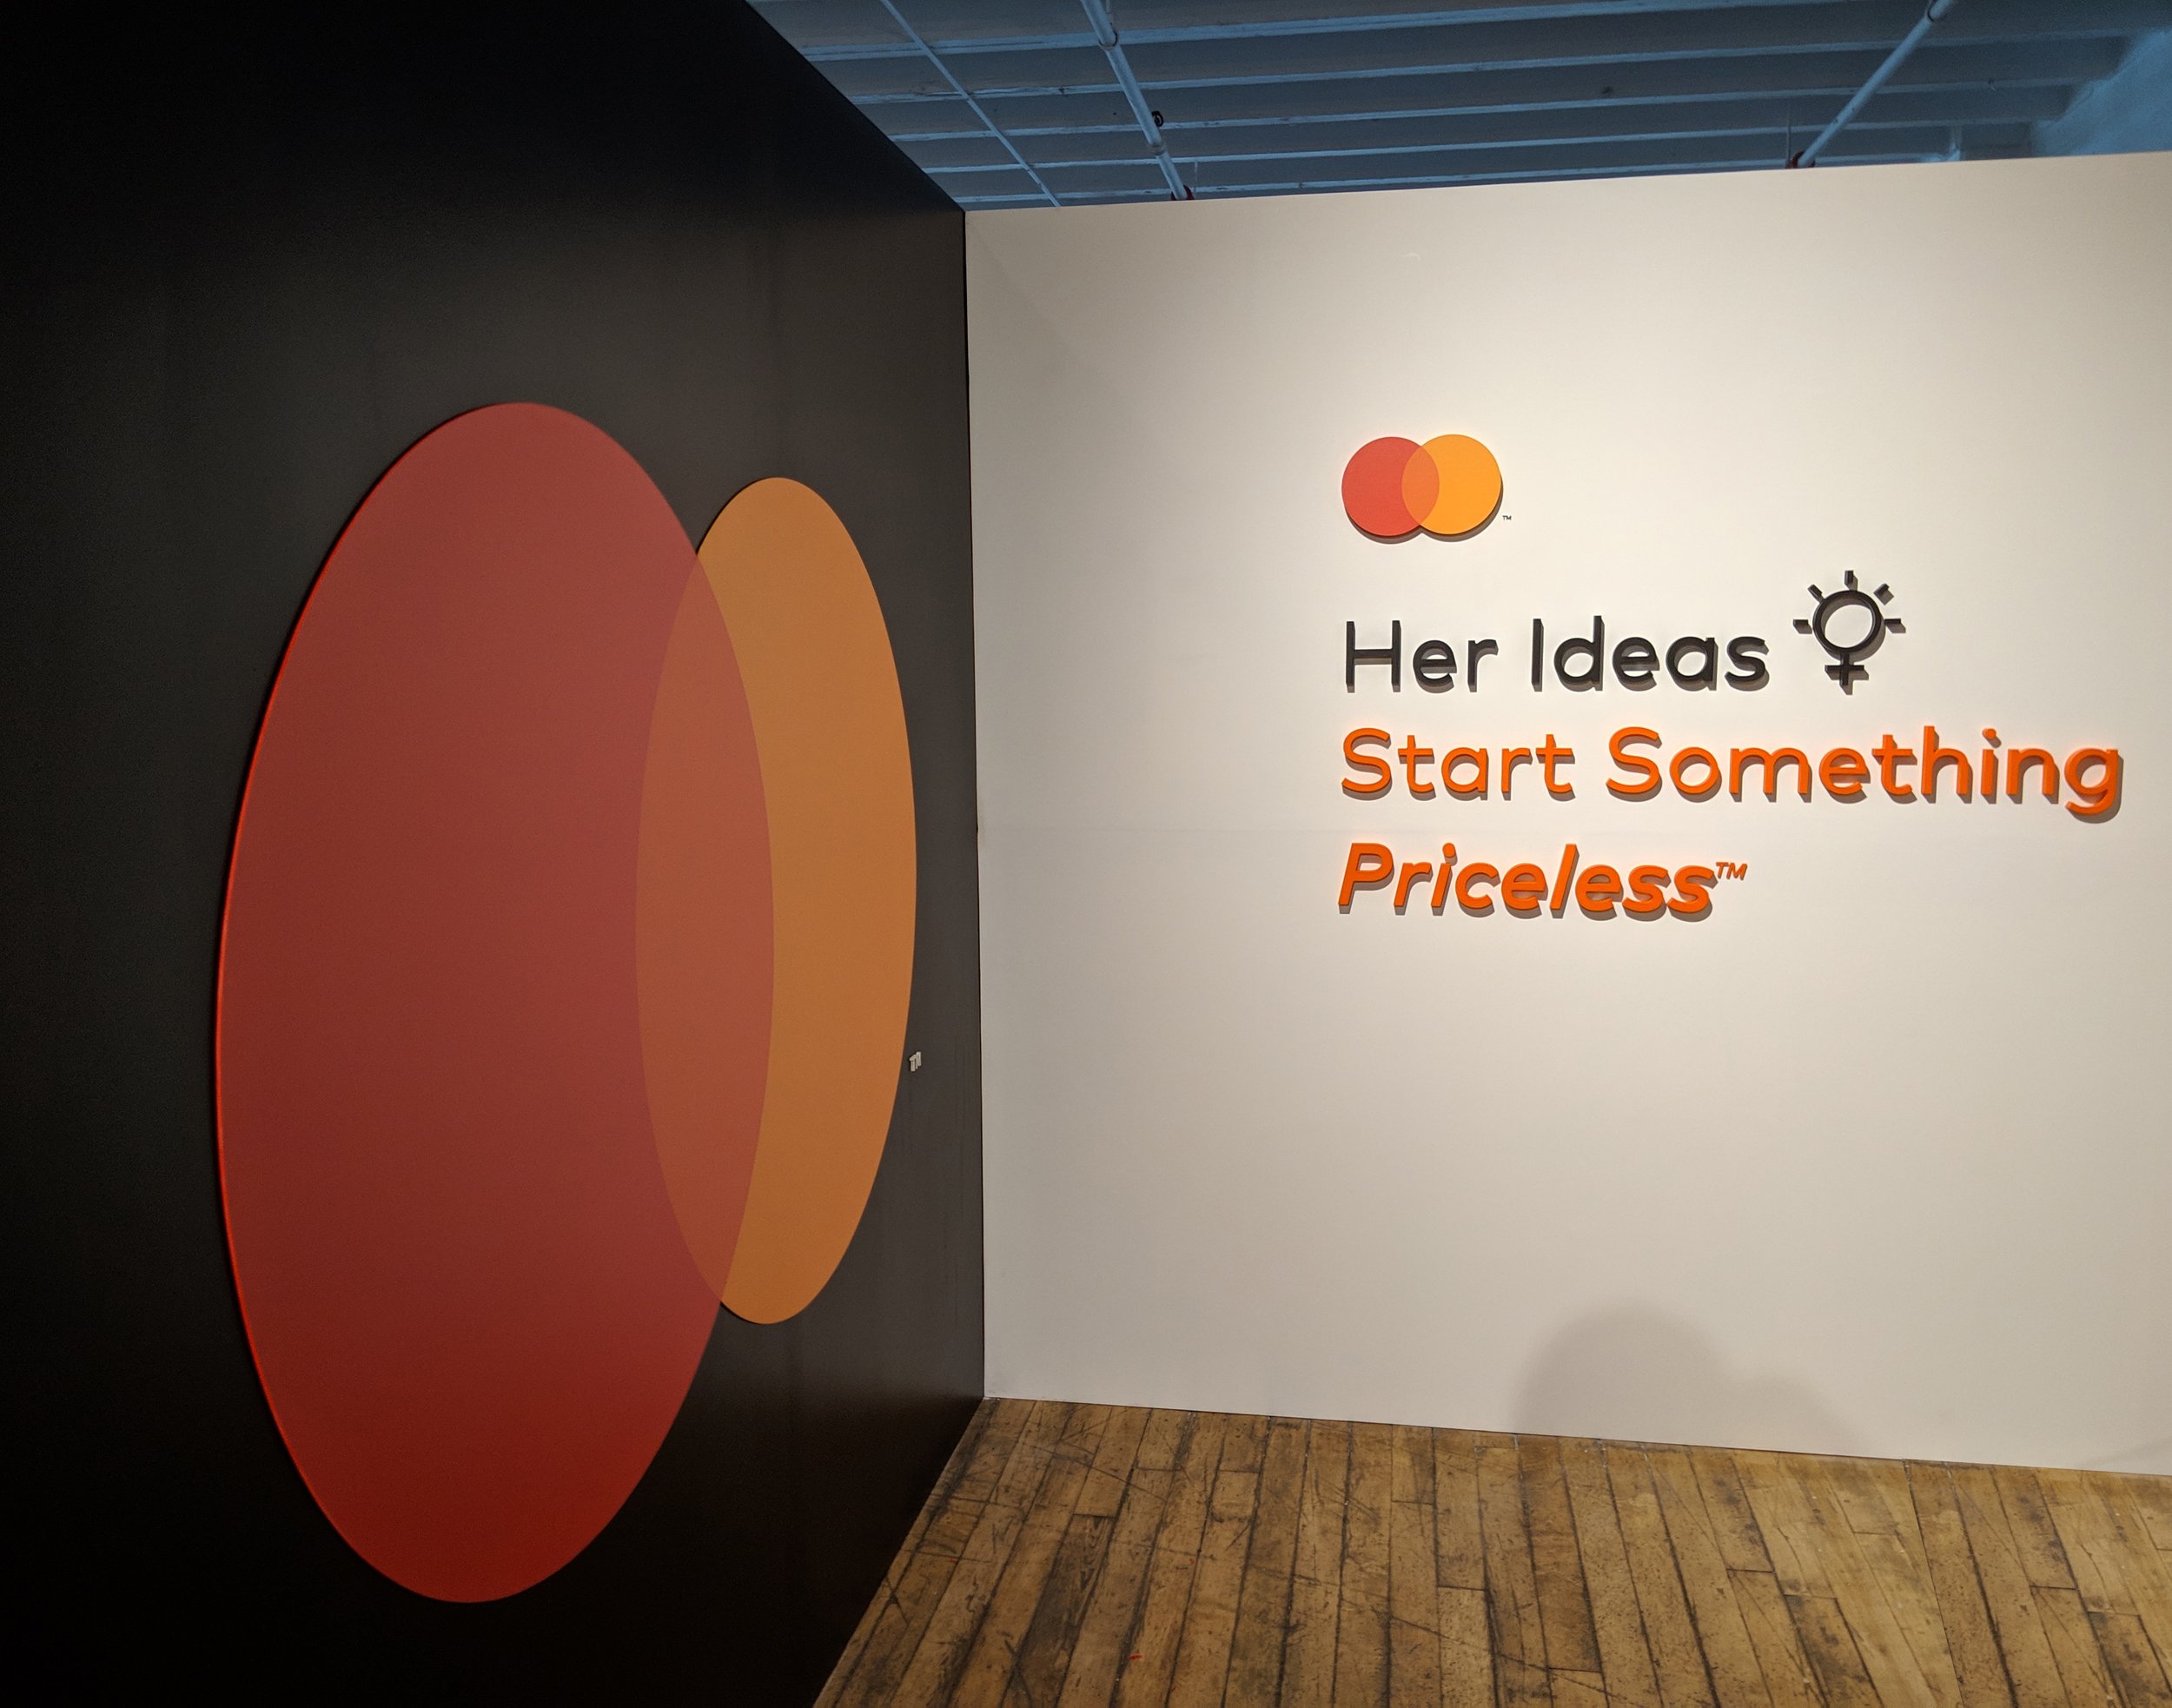 Mastercard - Create and Cultivate